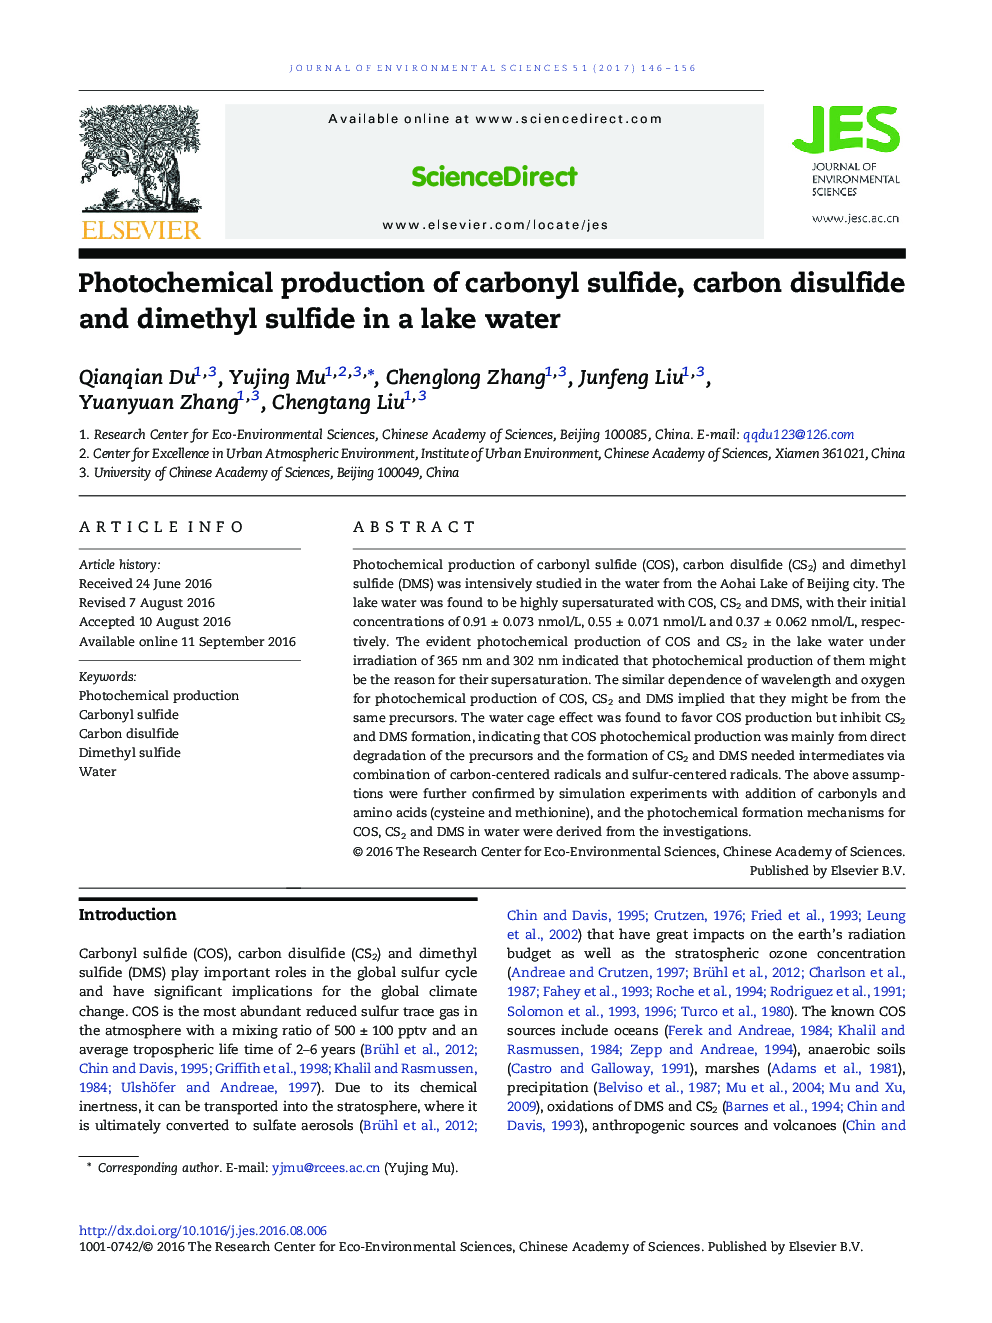 Photochemical production of carbonyl sulfide, carbon disulfide and dimethyl sulfide in a lake water